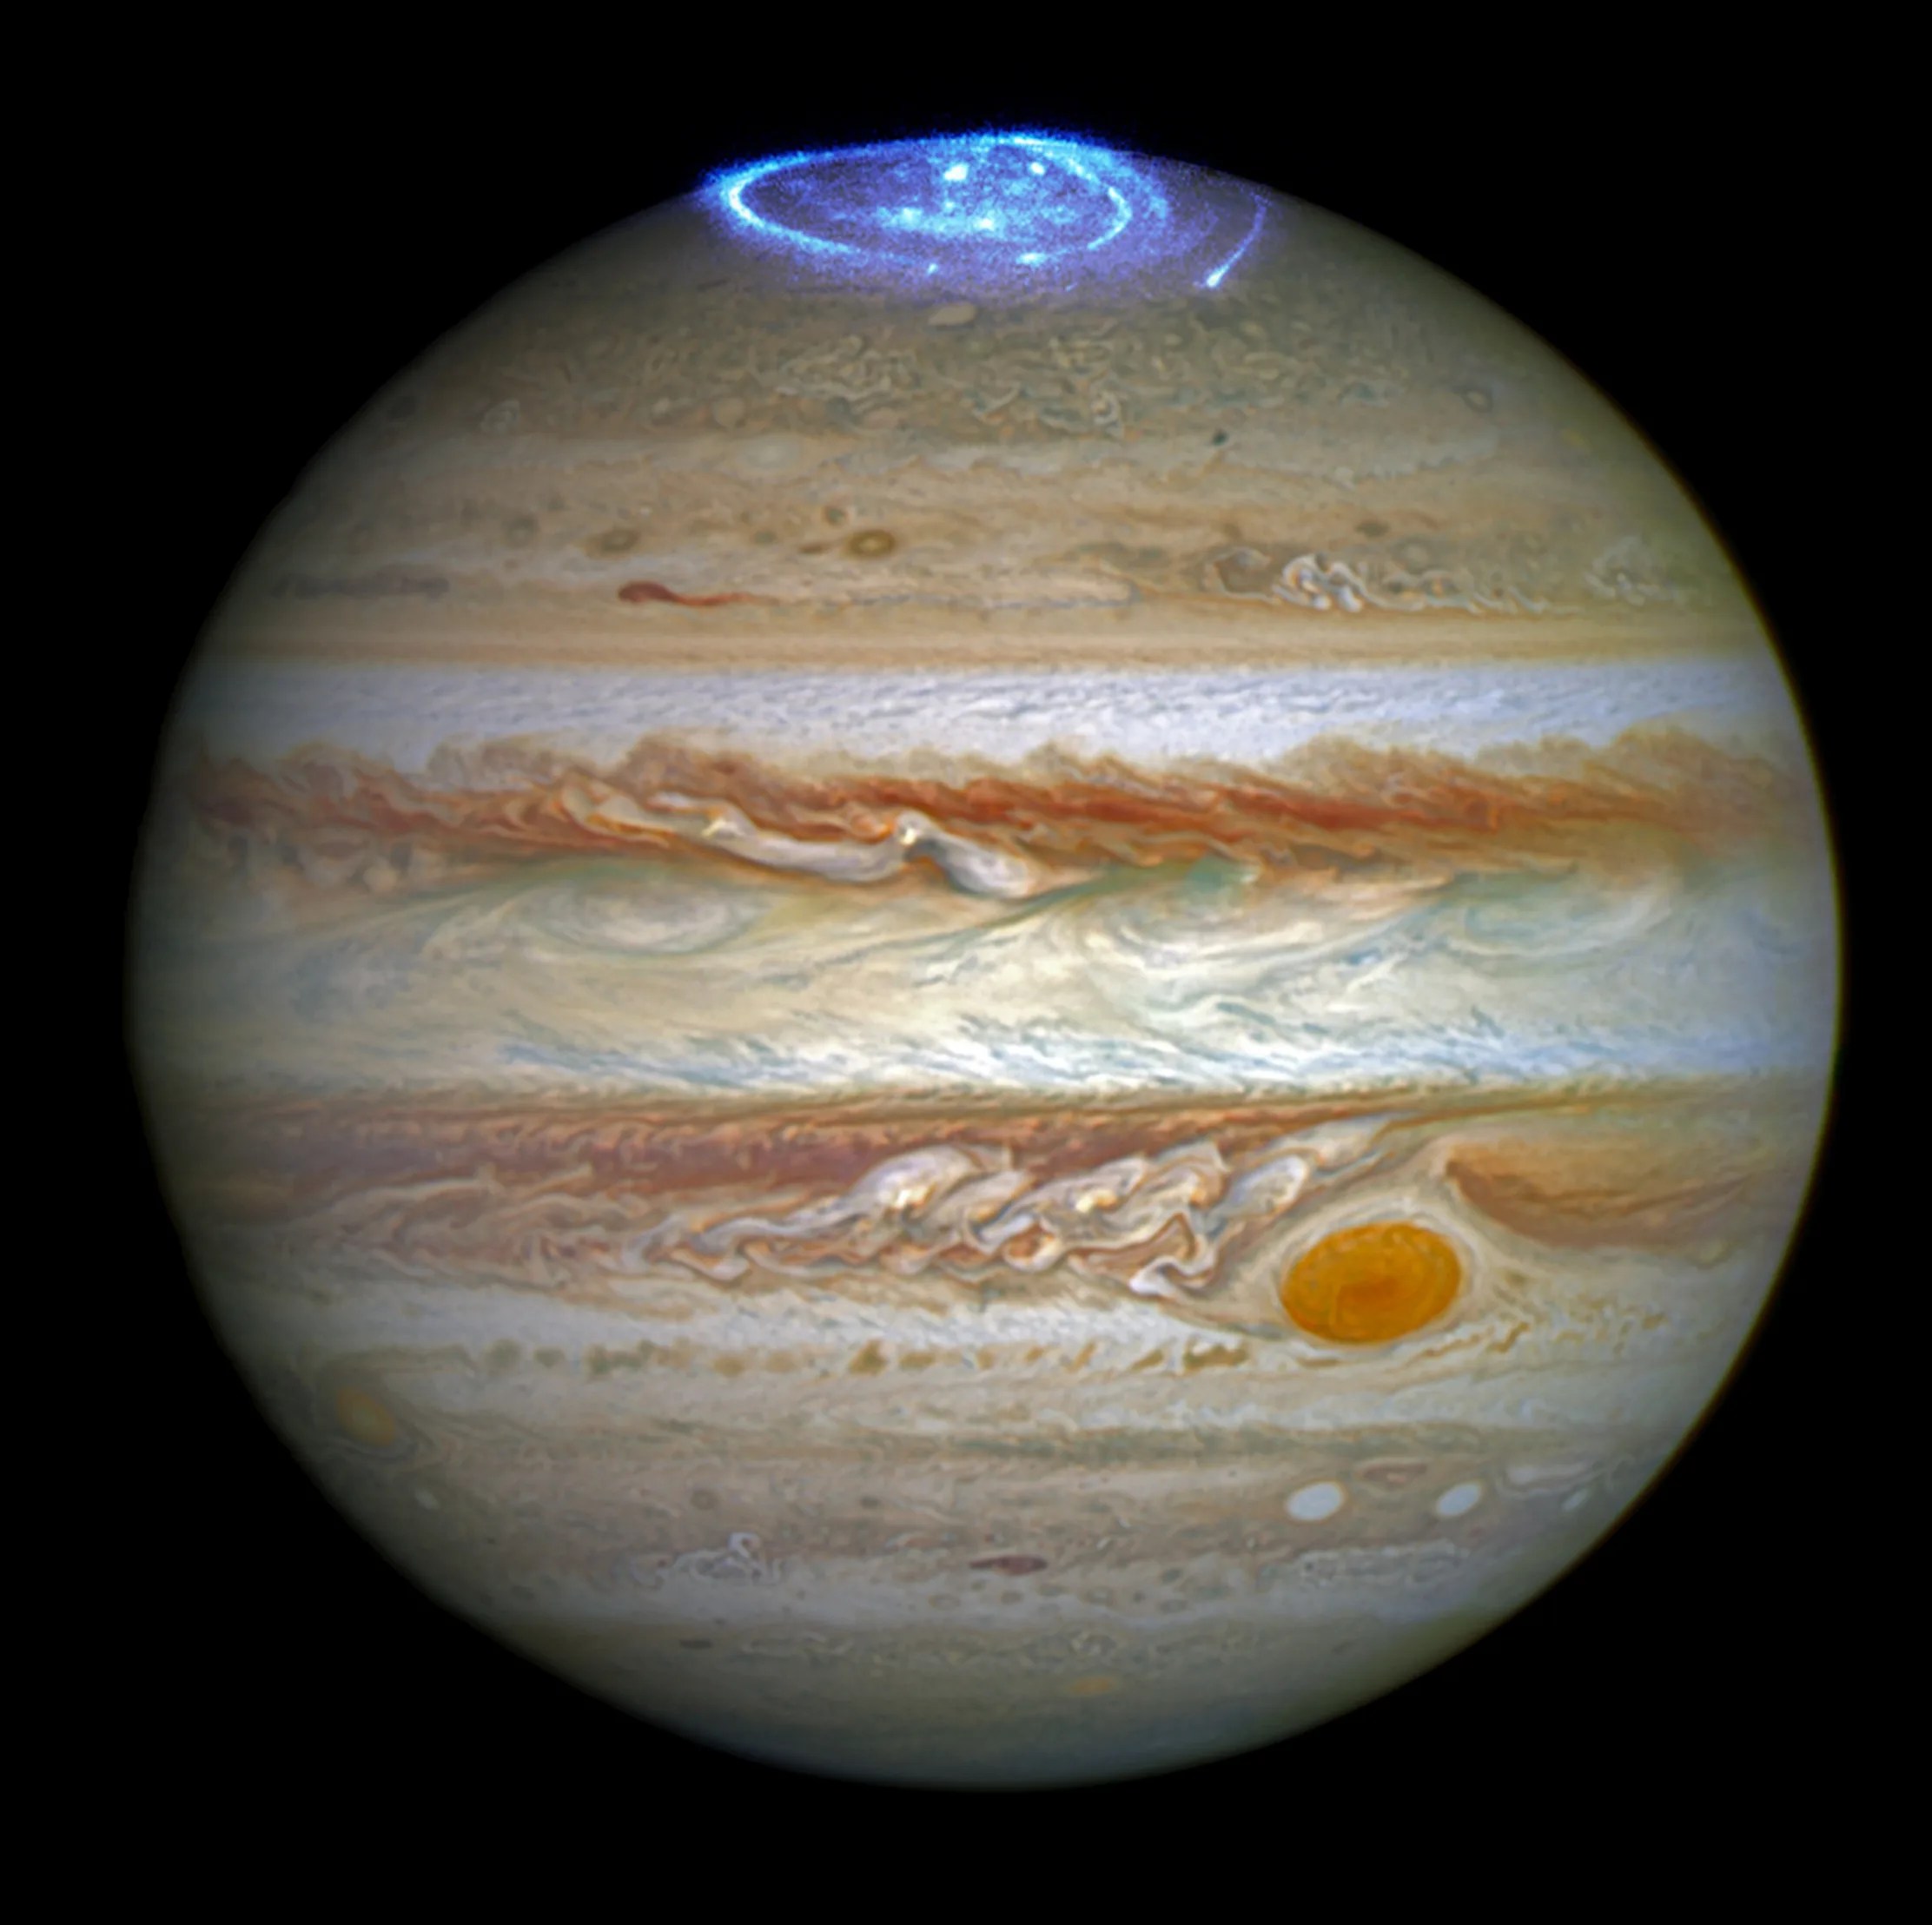 Jupiter with its rusty-orange, red, white, yellow, and tan horizontal cloud bands on a black background. The red spot is located in the lower-right quadrant of the image near image center. At the top of the planet is a swirl of light blue light.